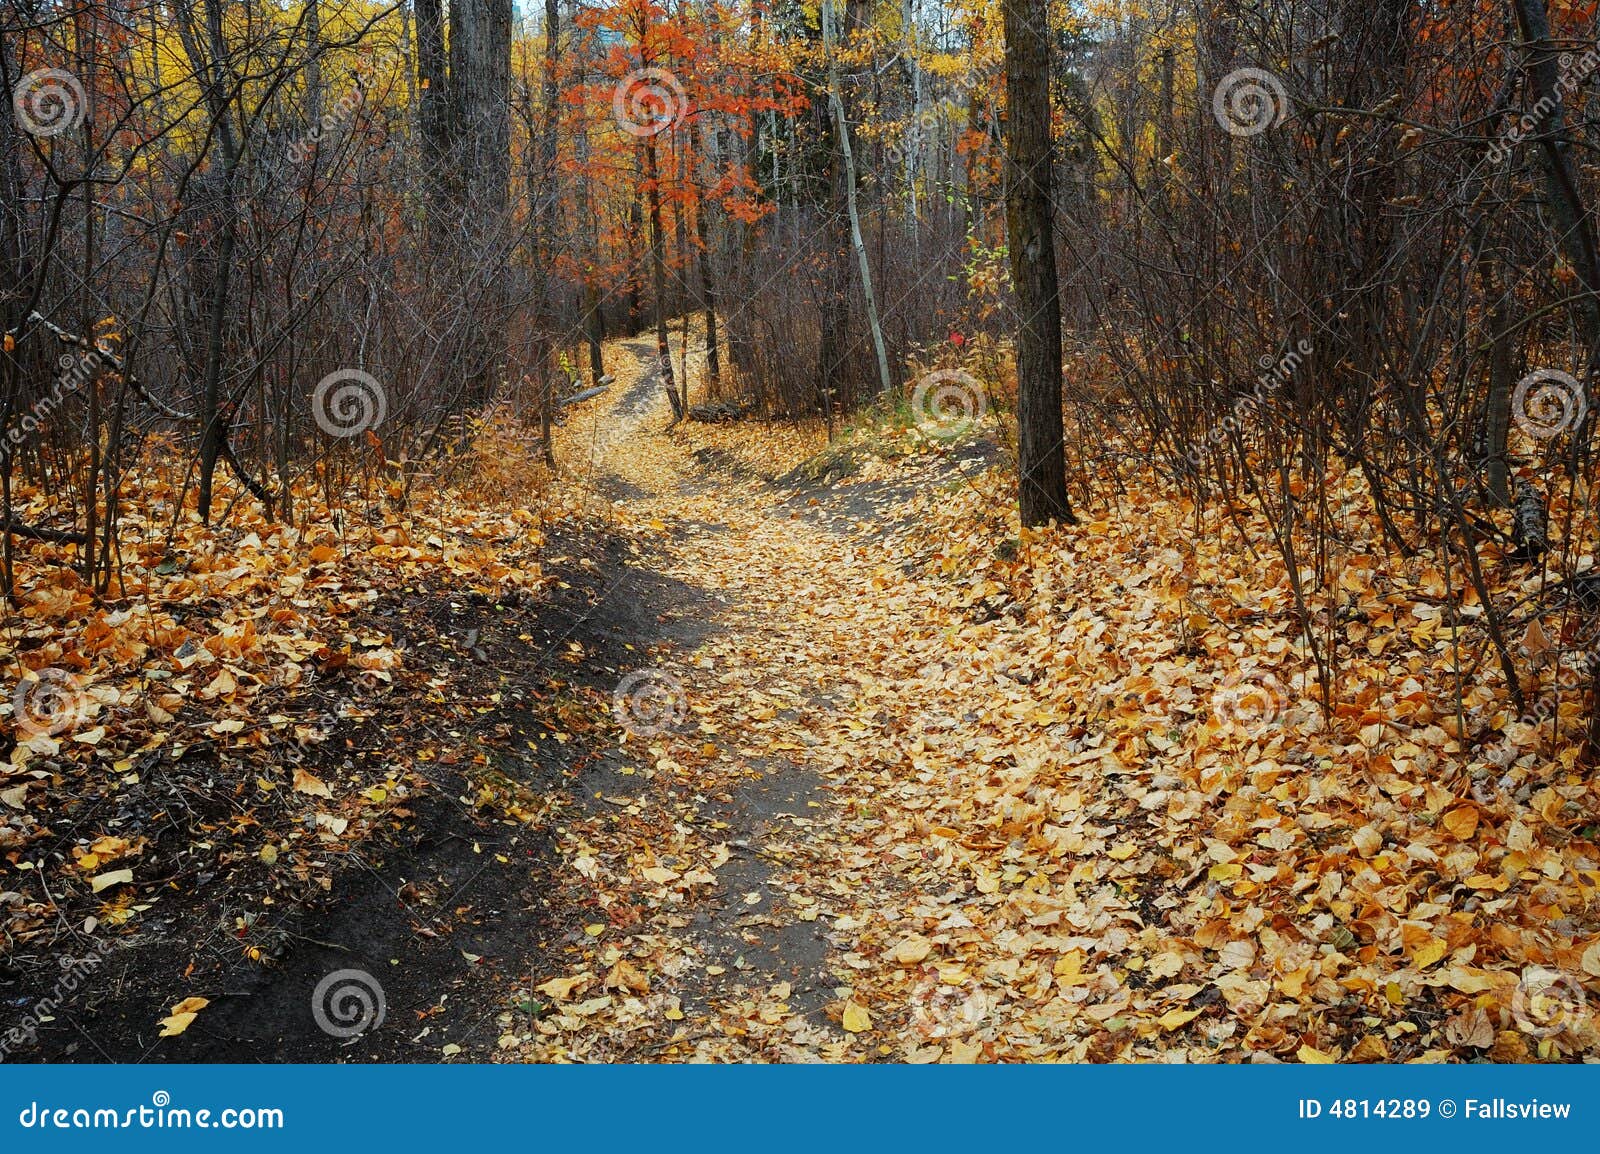 winding hiking trail in late autumn forest